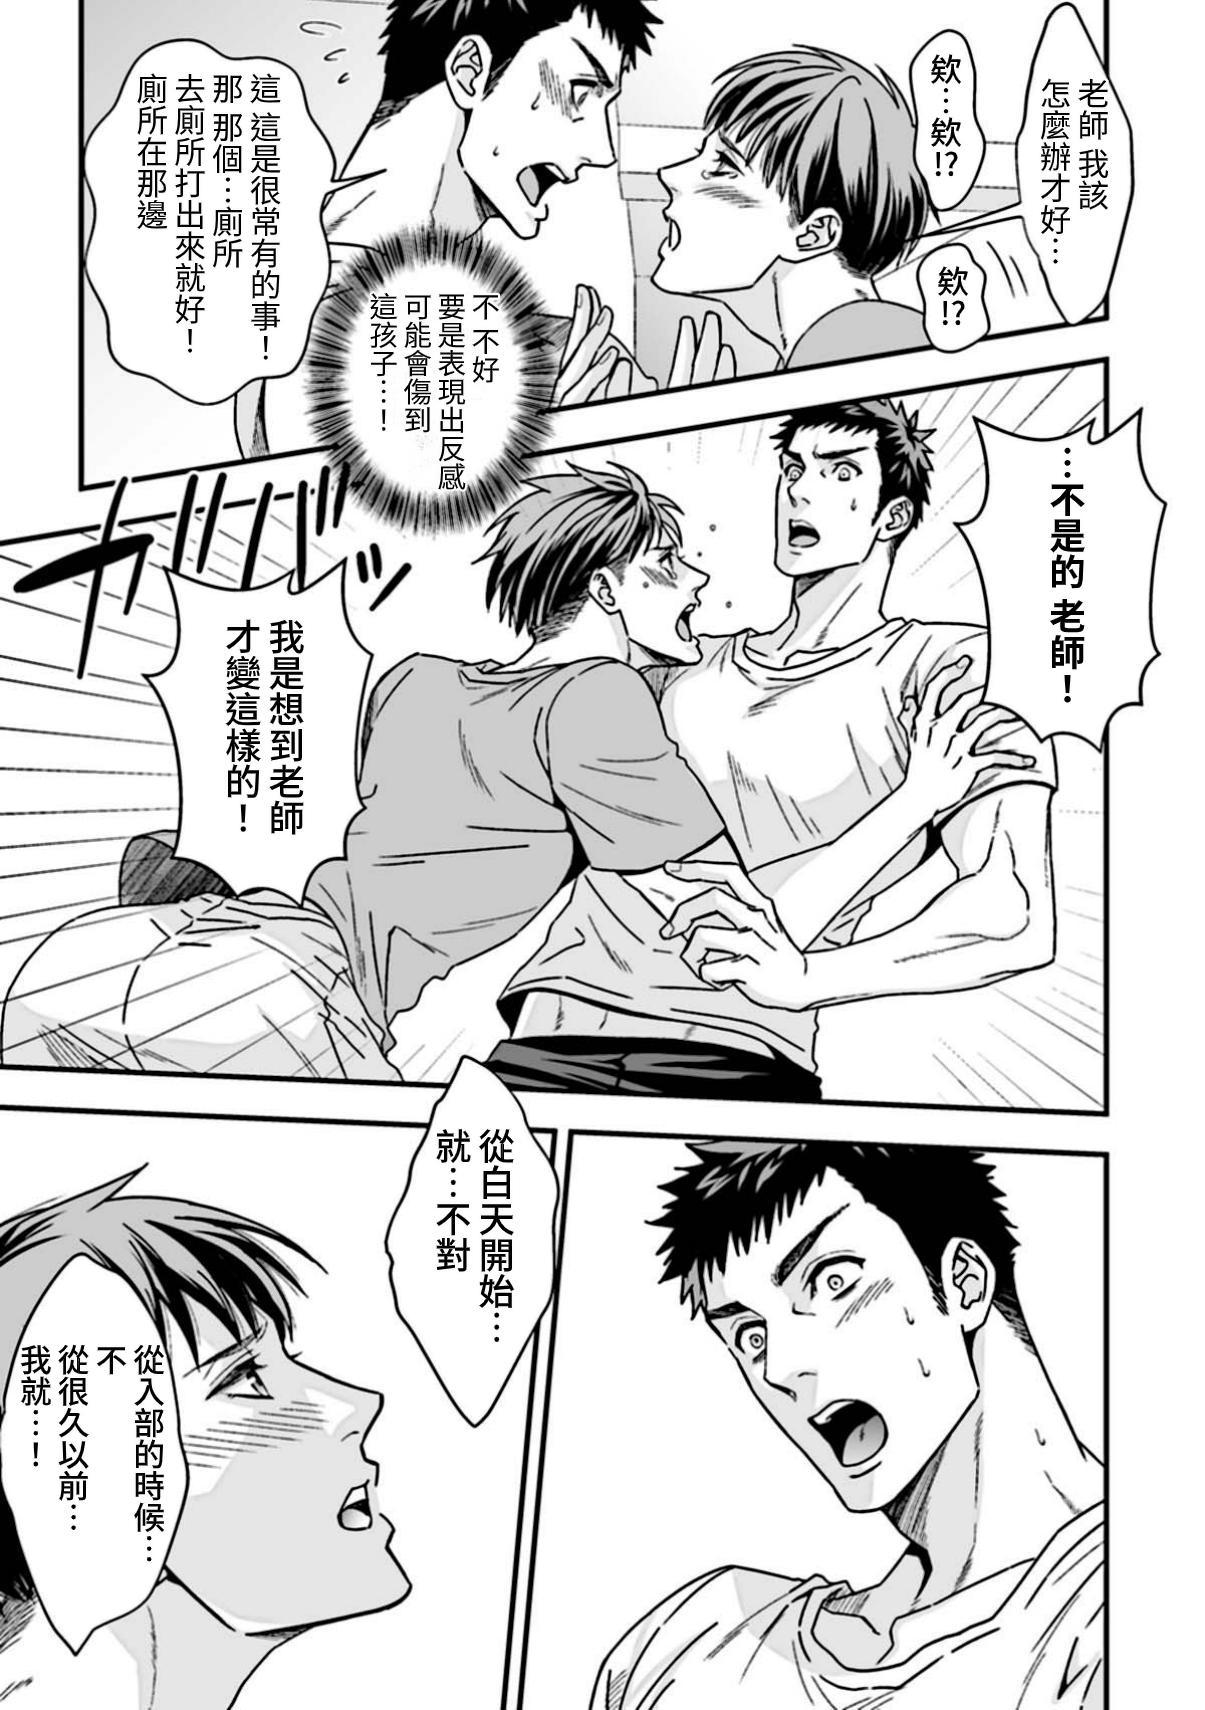 Transexual 體育教師2 Sis - Page 7